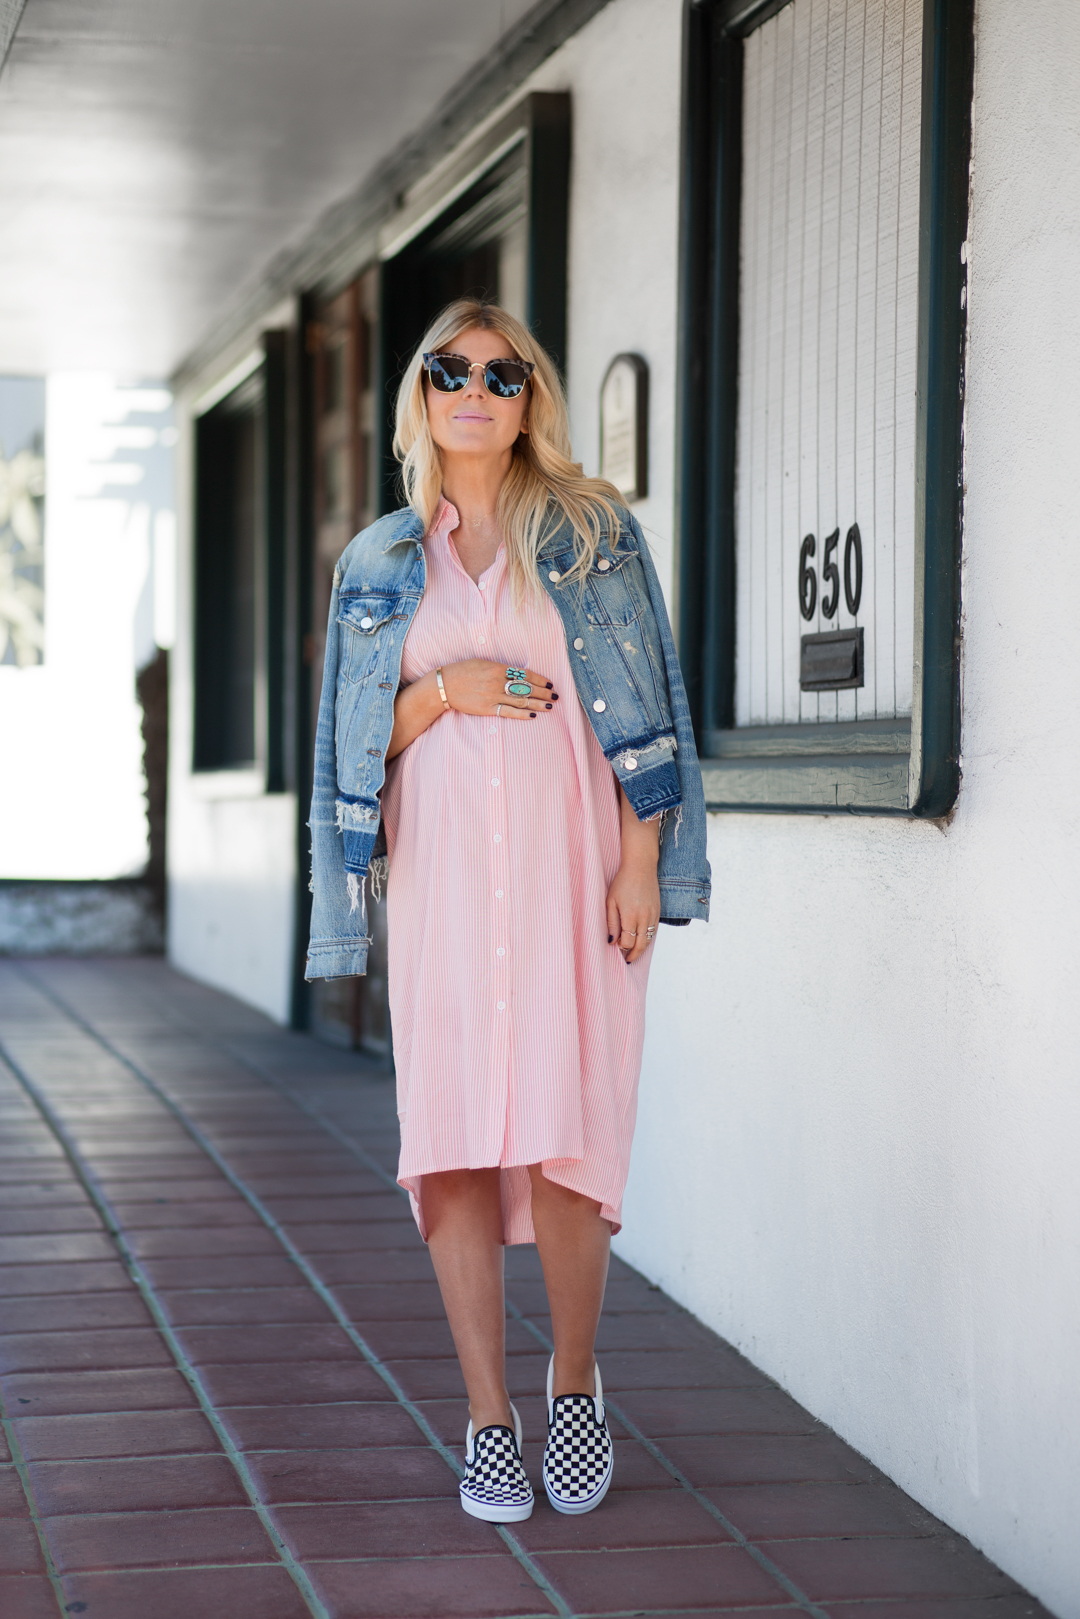 The Shirtdress + 3 things on my mind 